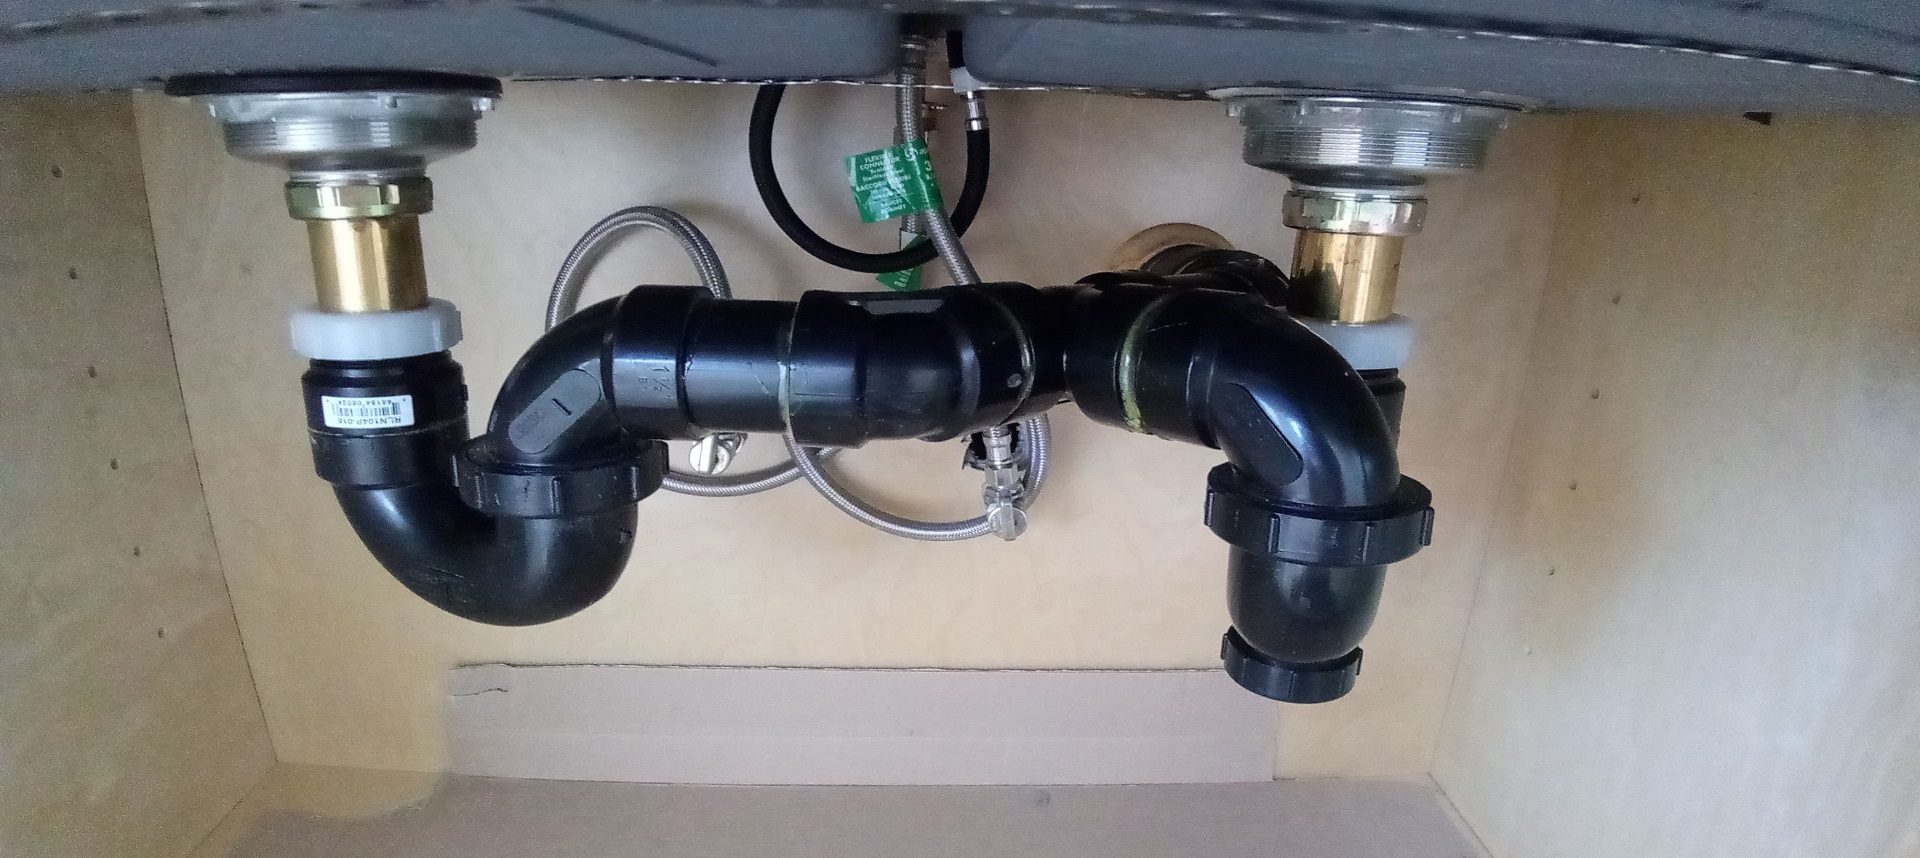 kitchen double sink drin pipe install